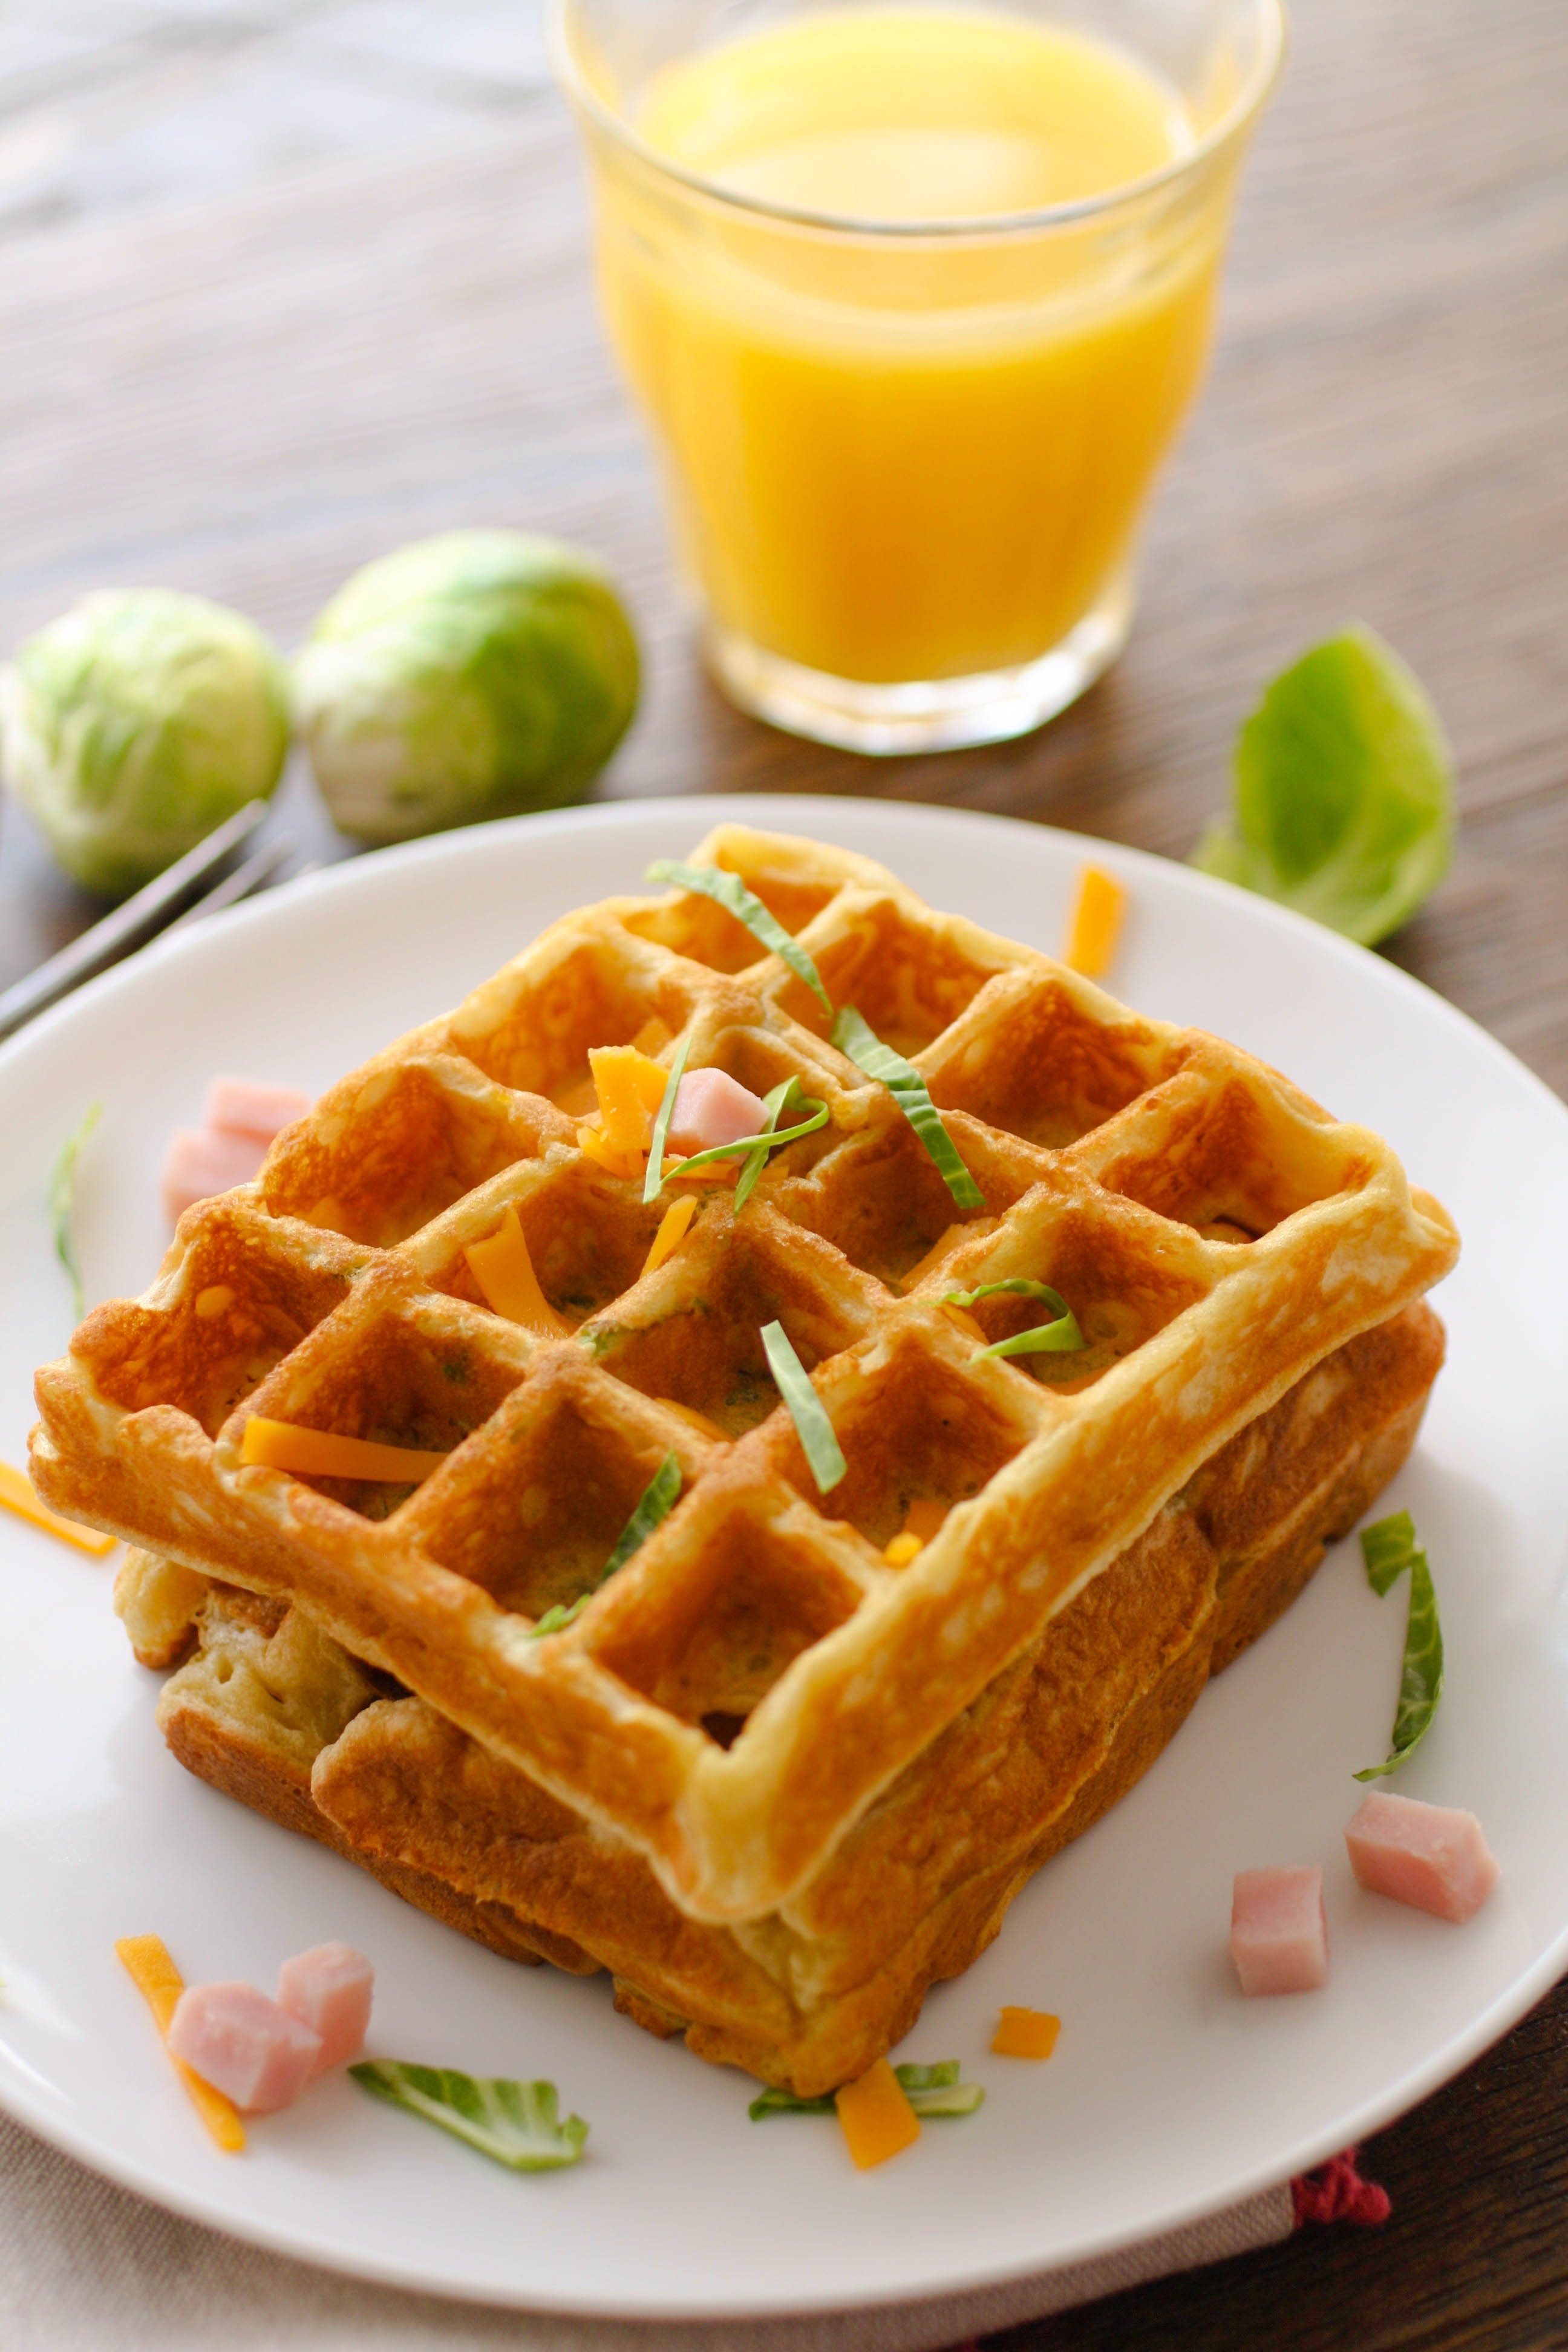 Savory Waffles with Ham, Cheddar and Brussels Sprouts